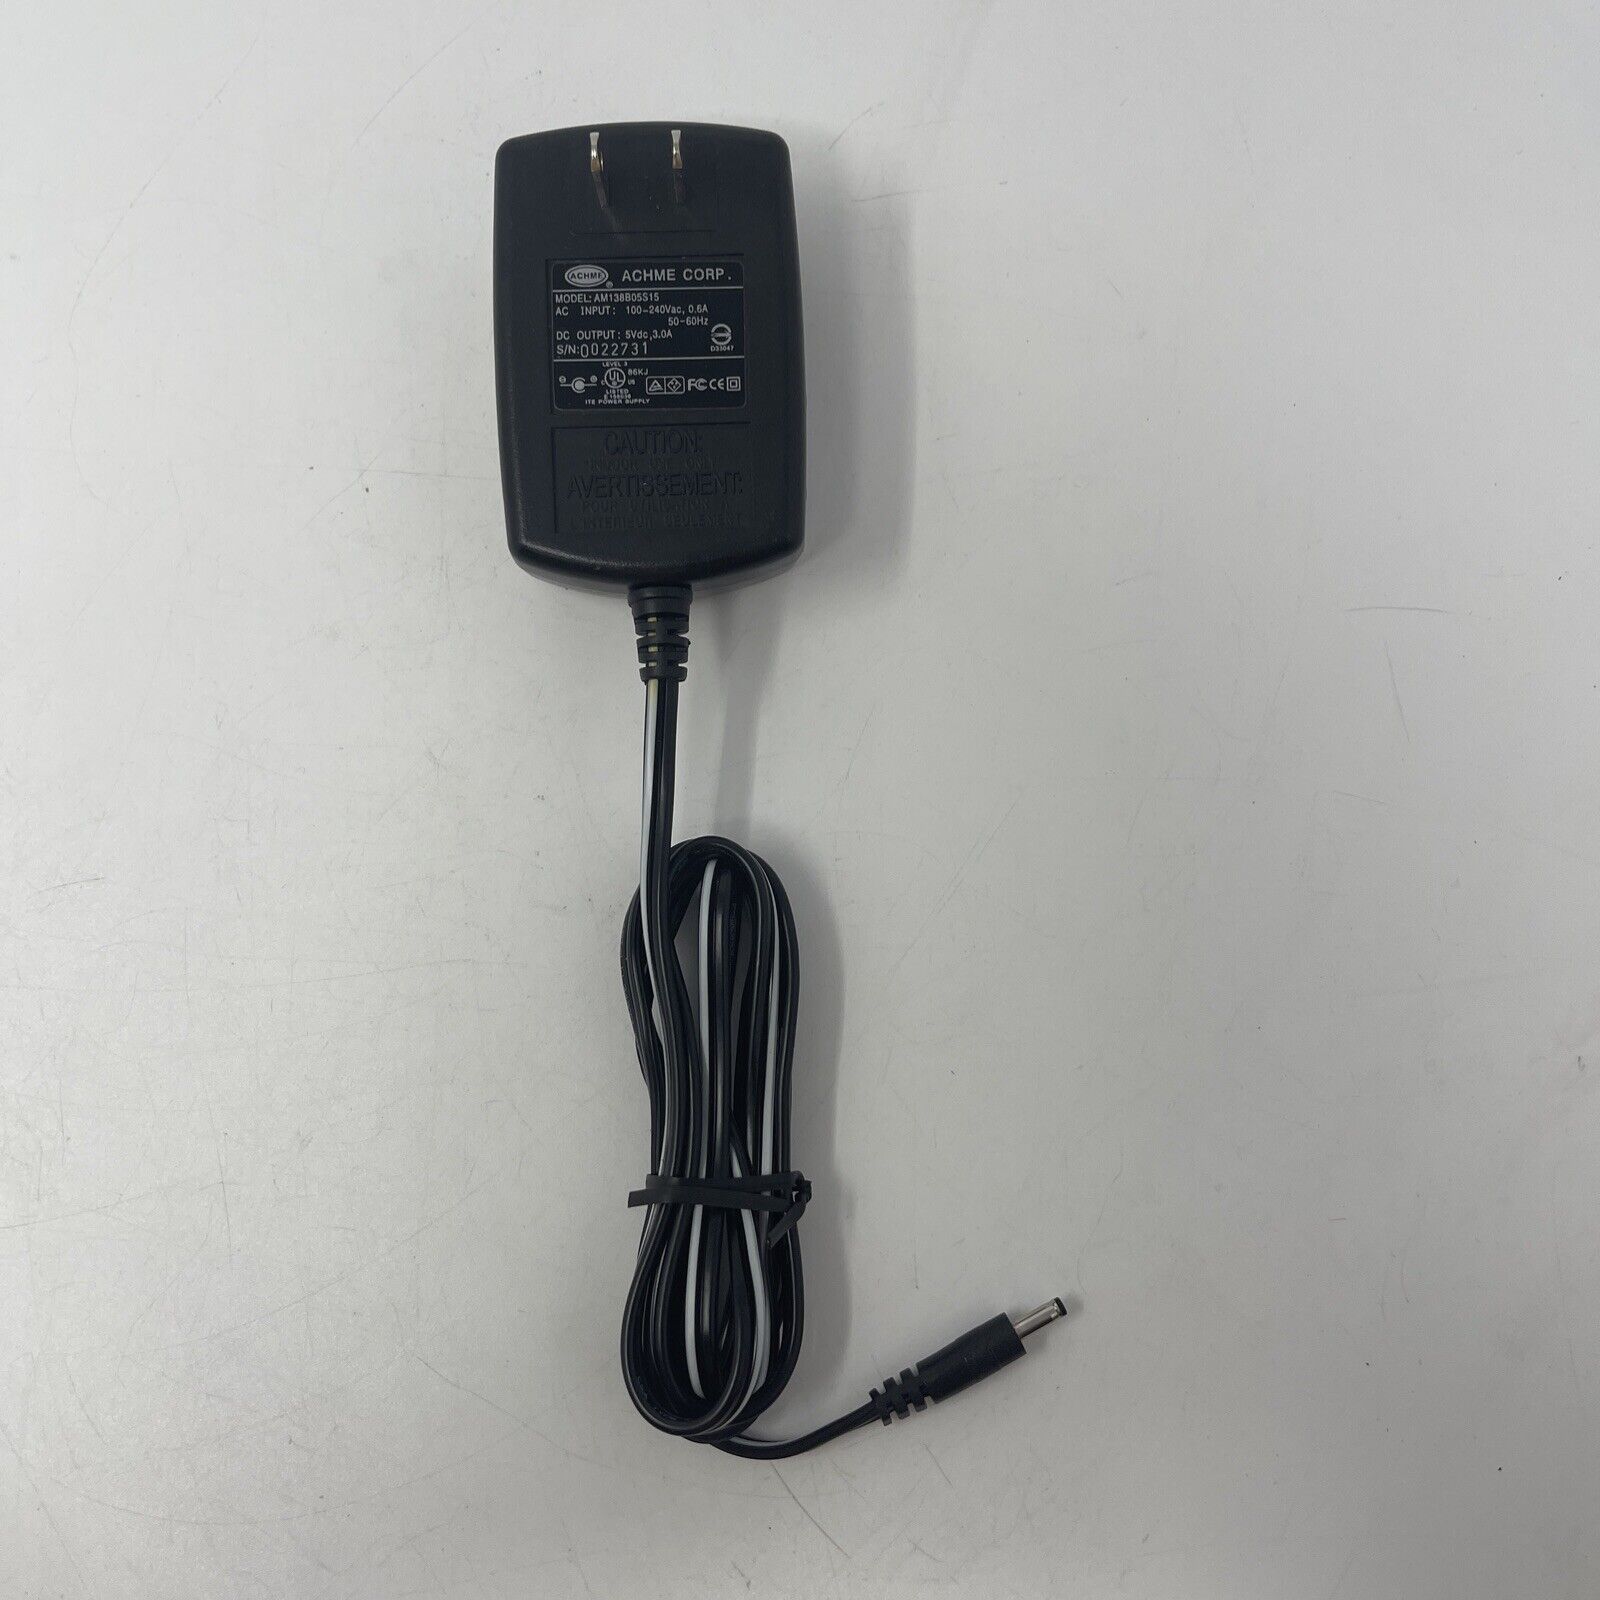 *Brand NEW*Arcade1up Game Machines Arcade 1up Fits ALL Riser AC Adapter Power Supply